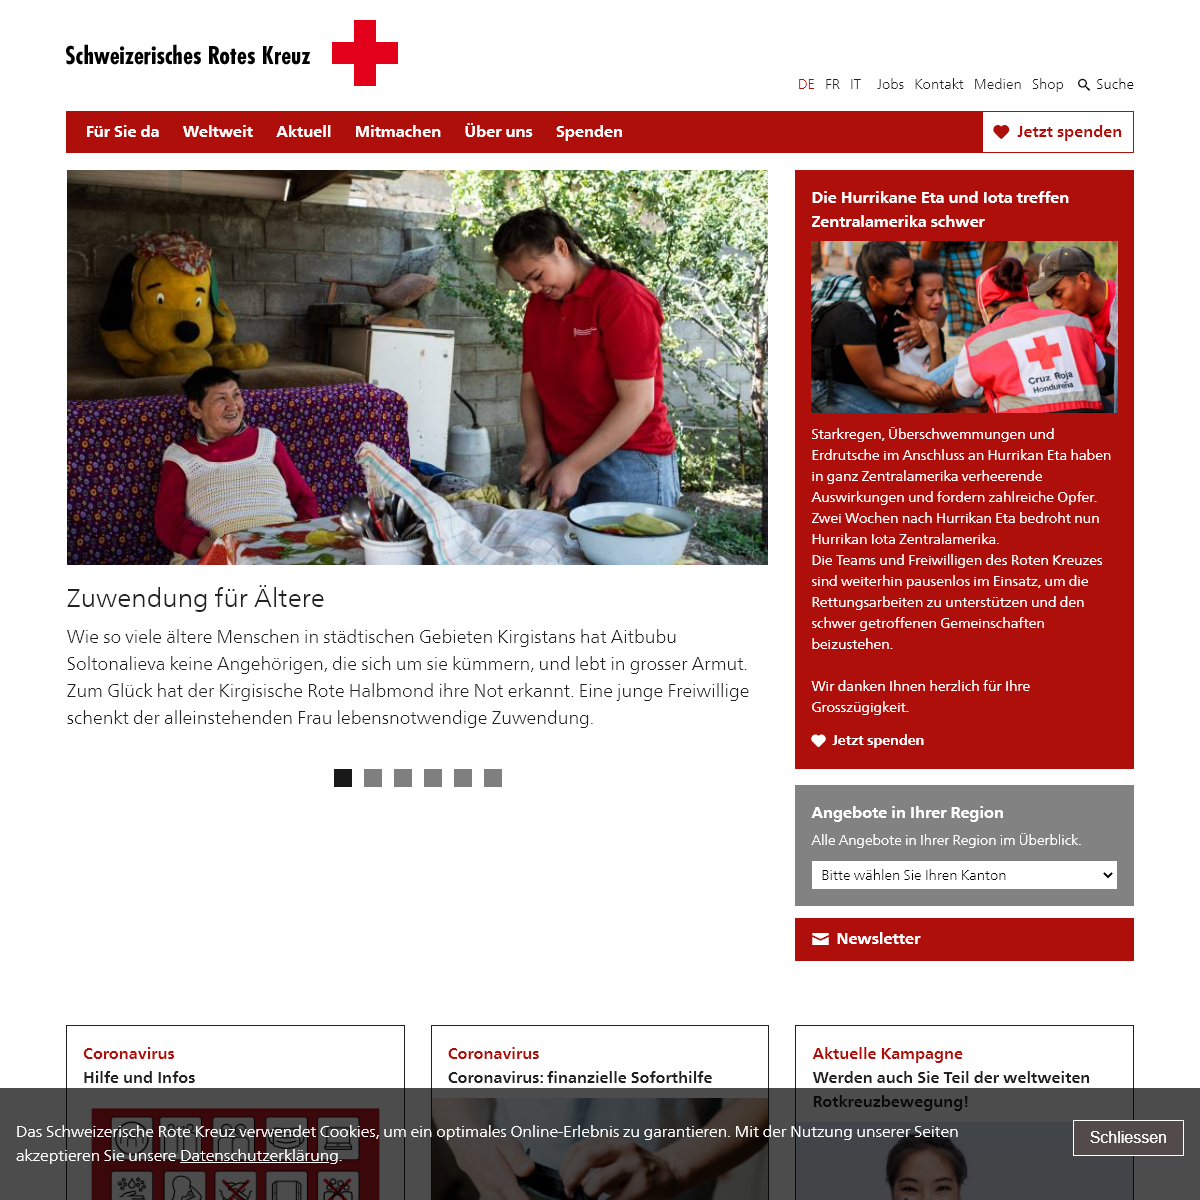 A complete backup of redcross.ch